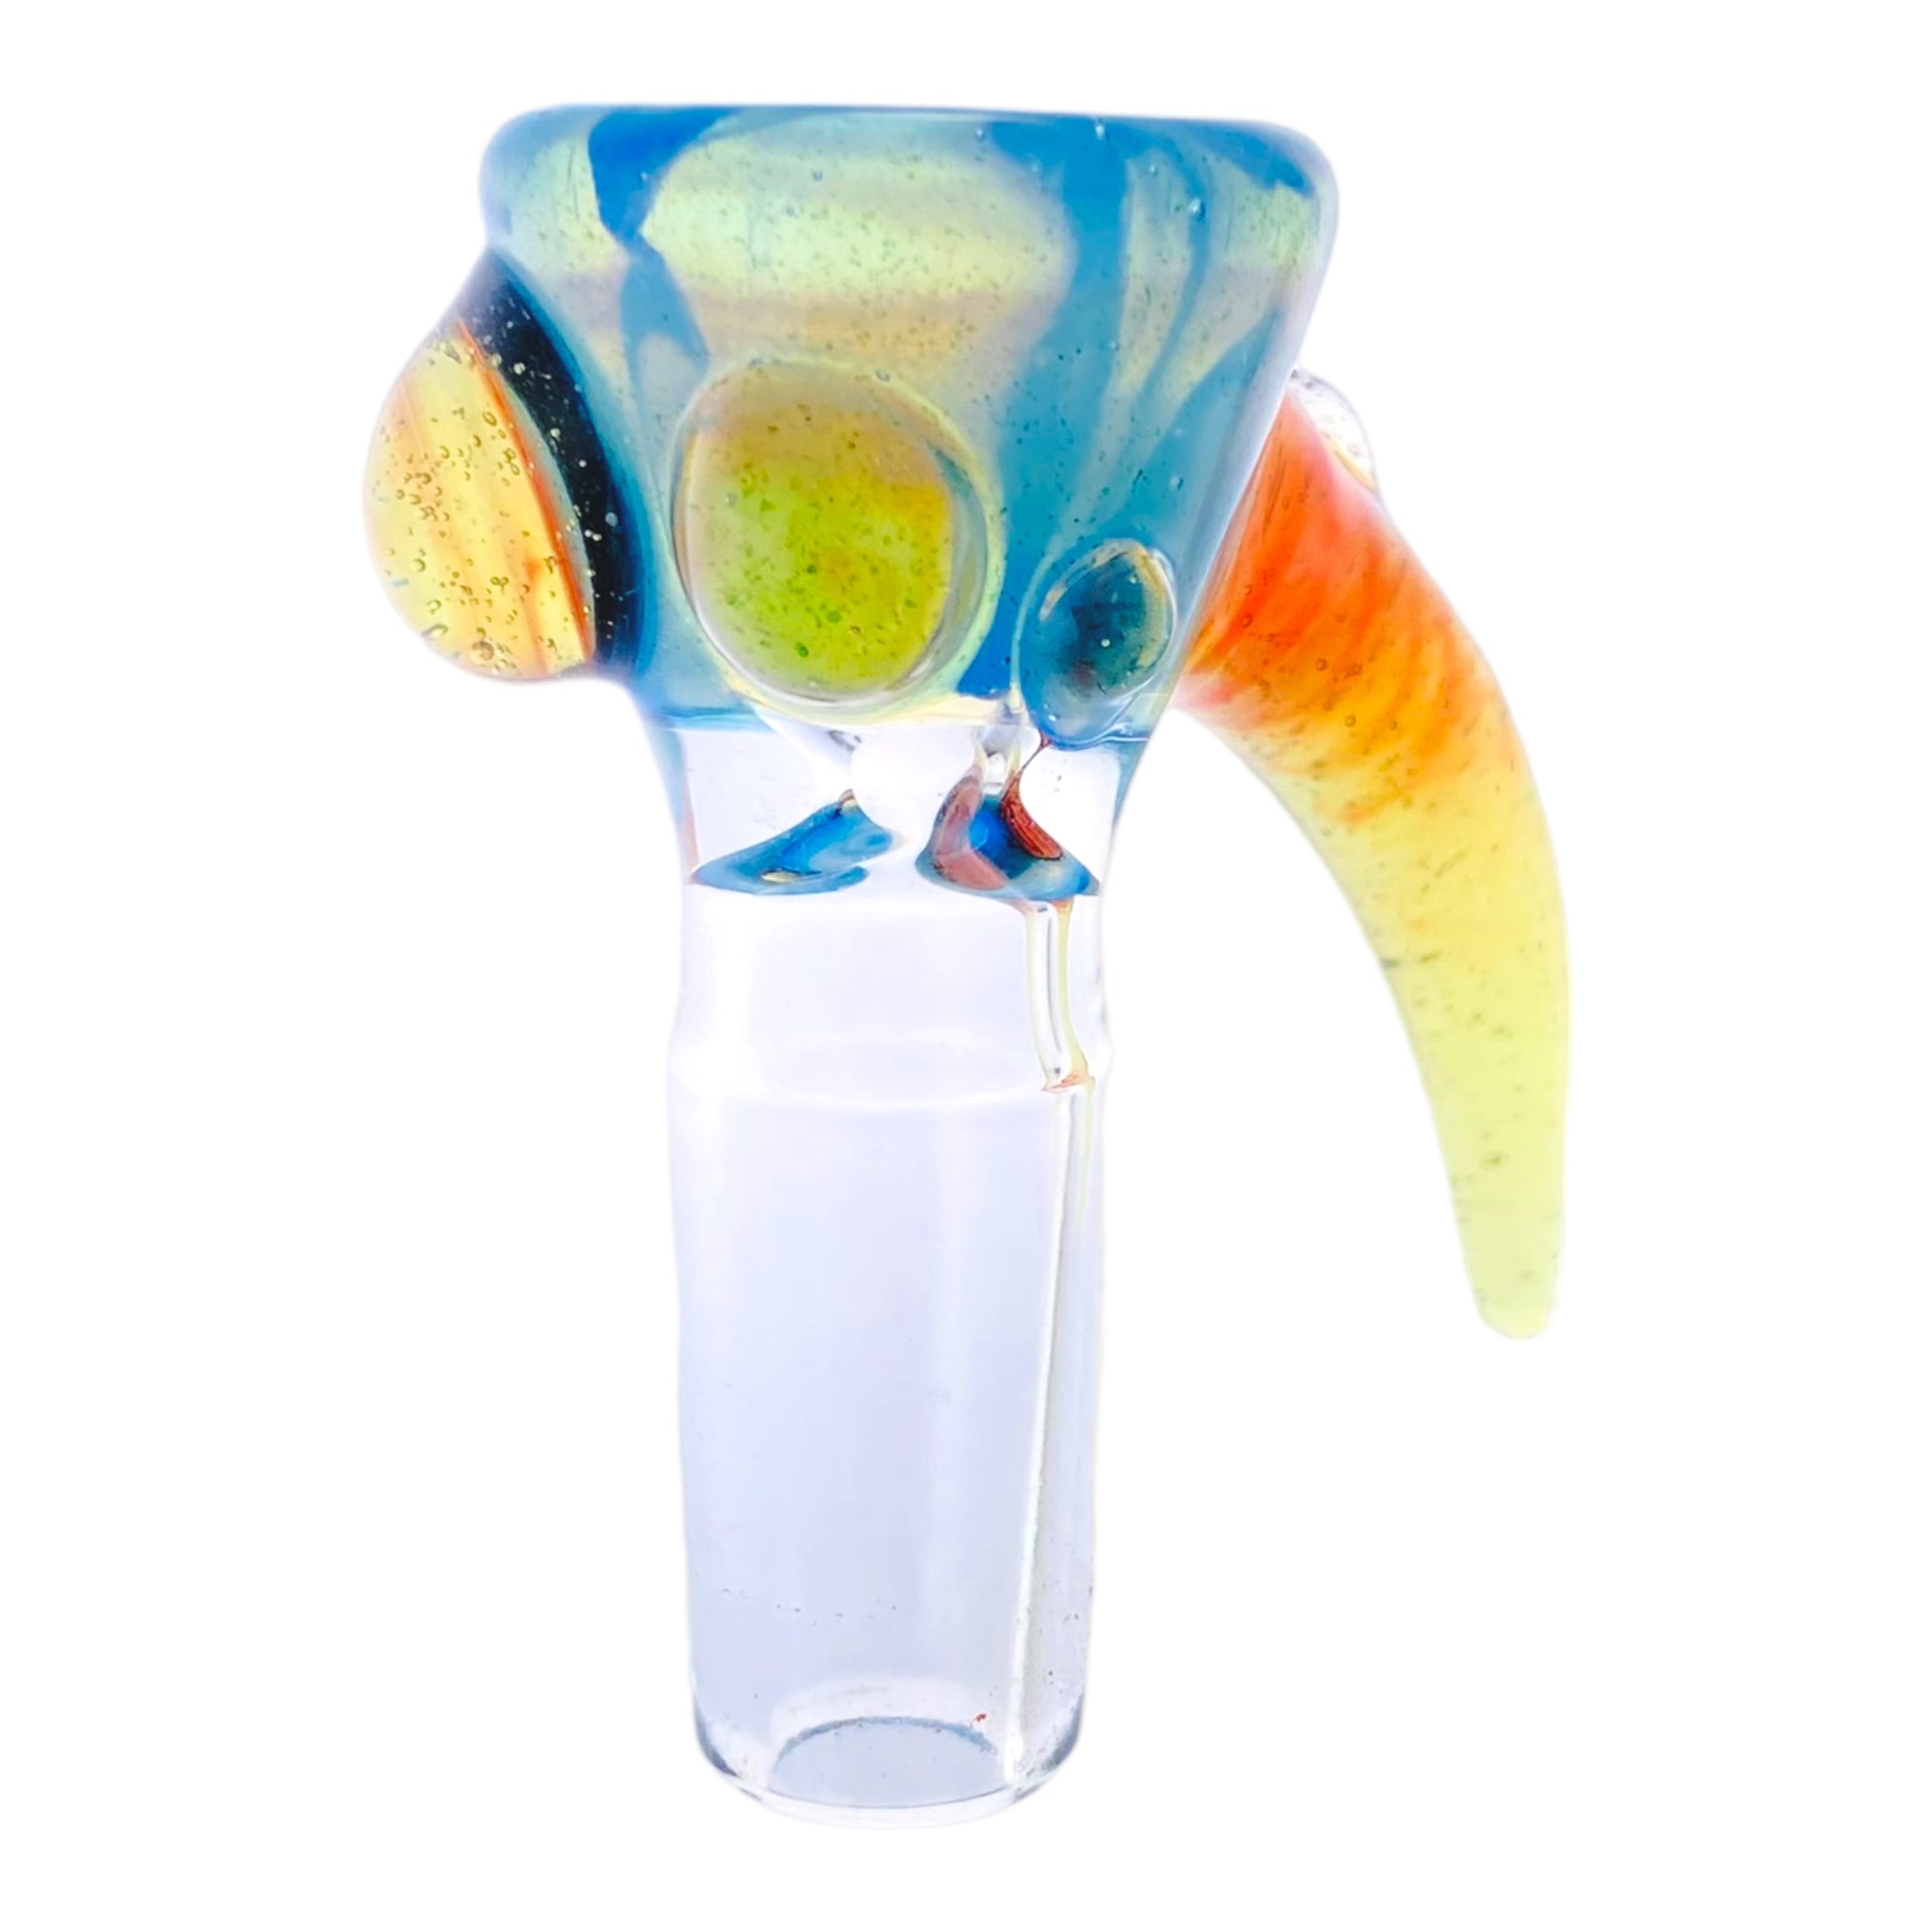 Arko Glass - 14mm Flower Bowl - Tonic Blue Bowl With Fire Fade Handle